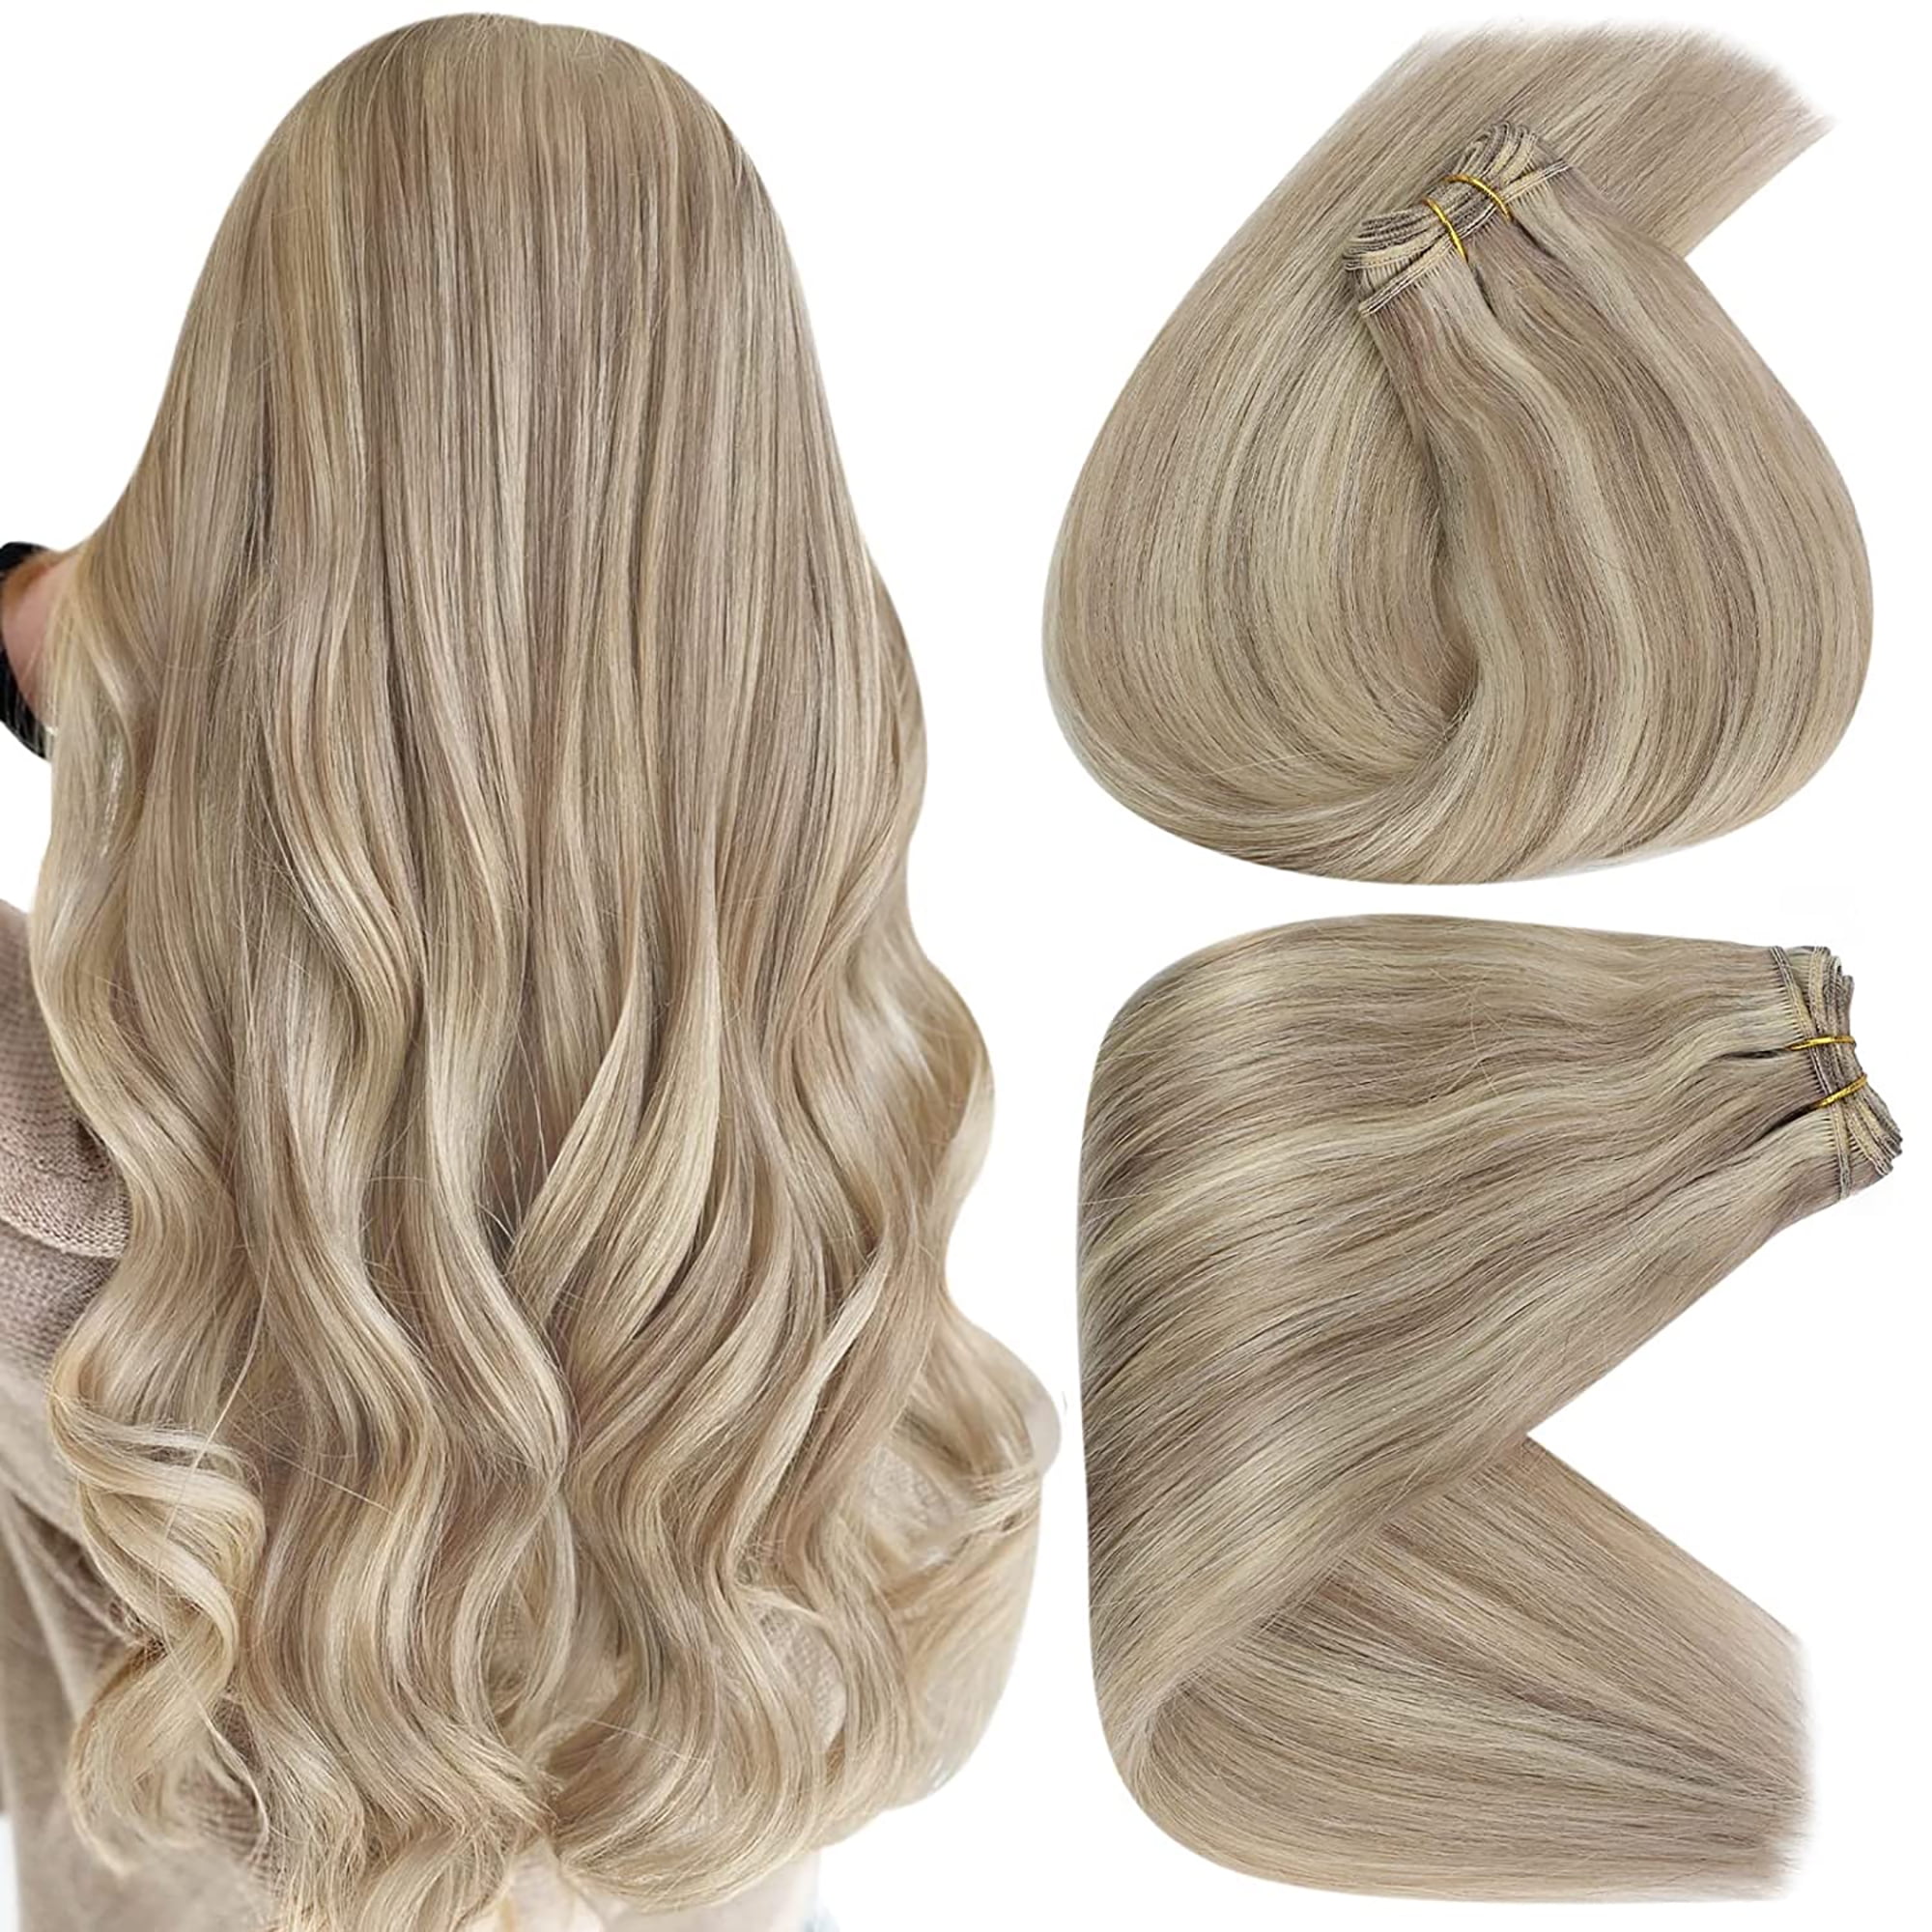 Sunny Weft Hair Extensions Human Hair 24 inch Highlights Dark Ash Blonde  and Golden Blonde Hair Extensions Straight 100g 